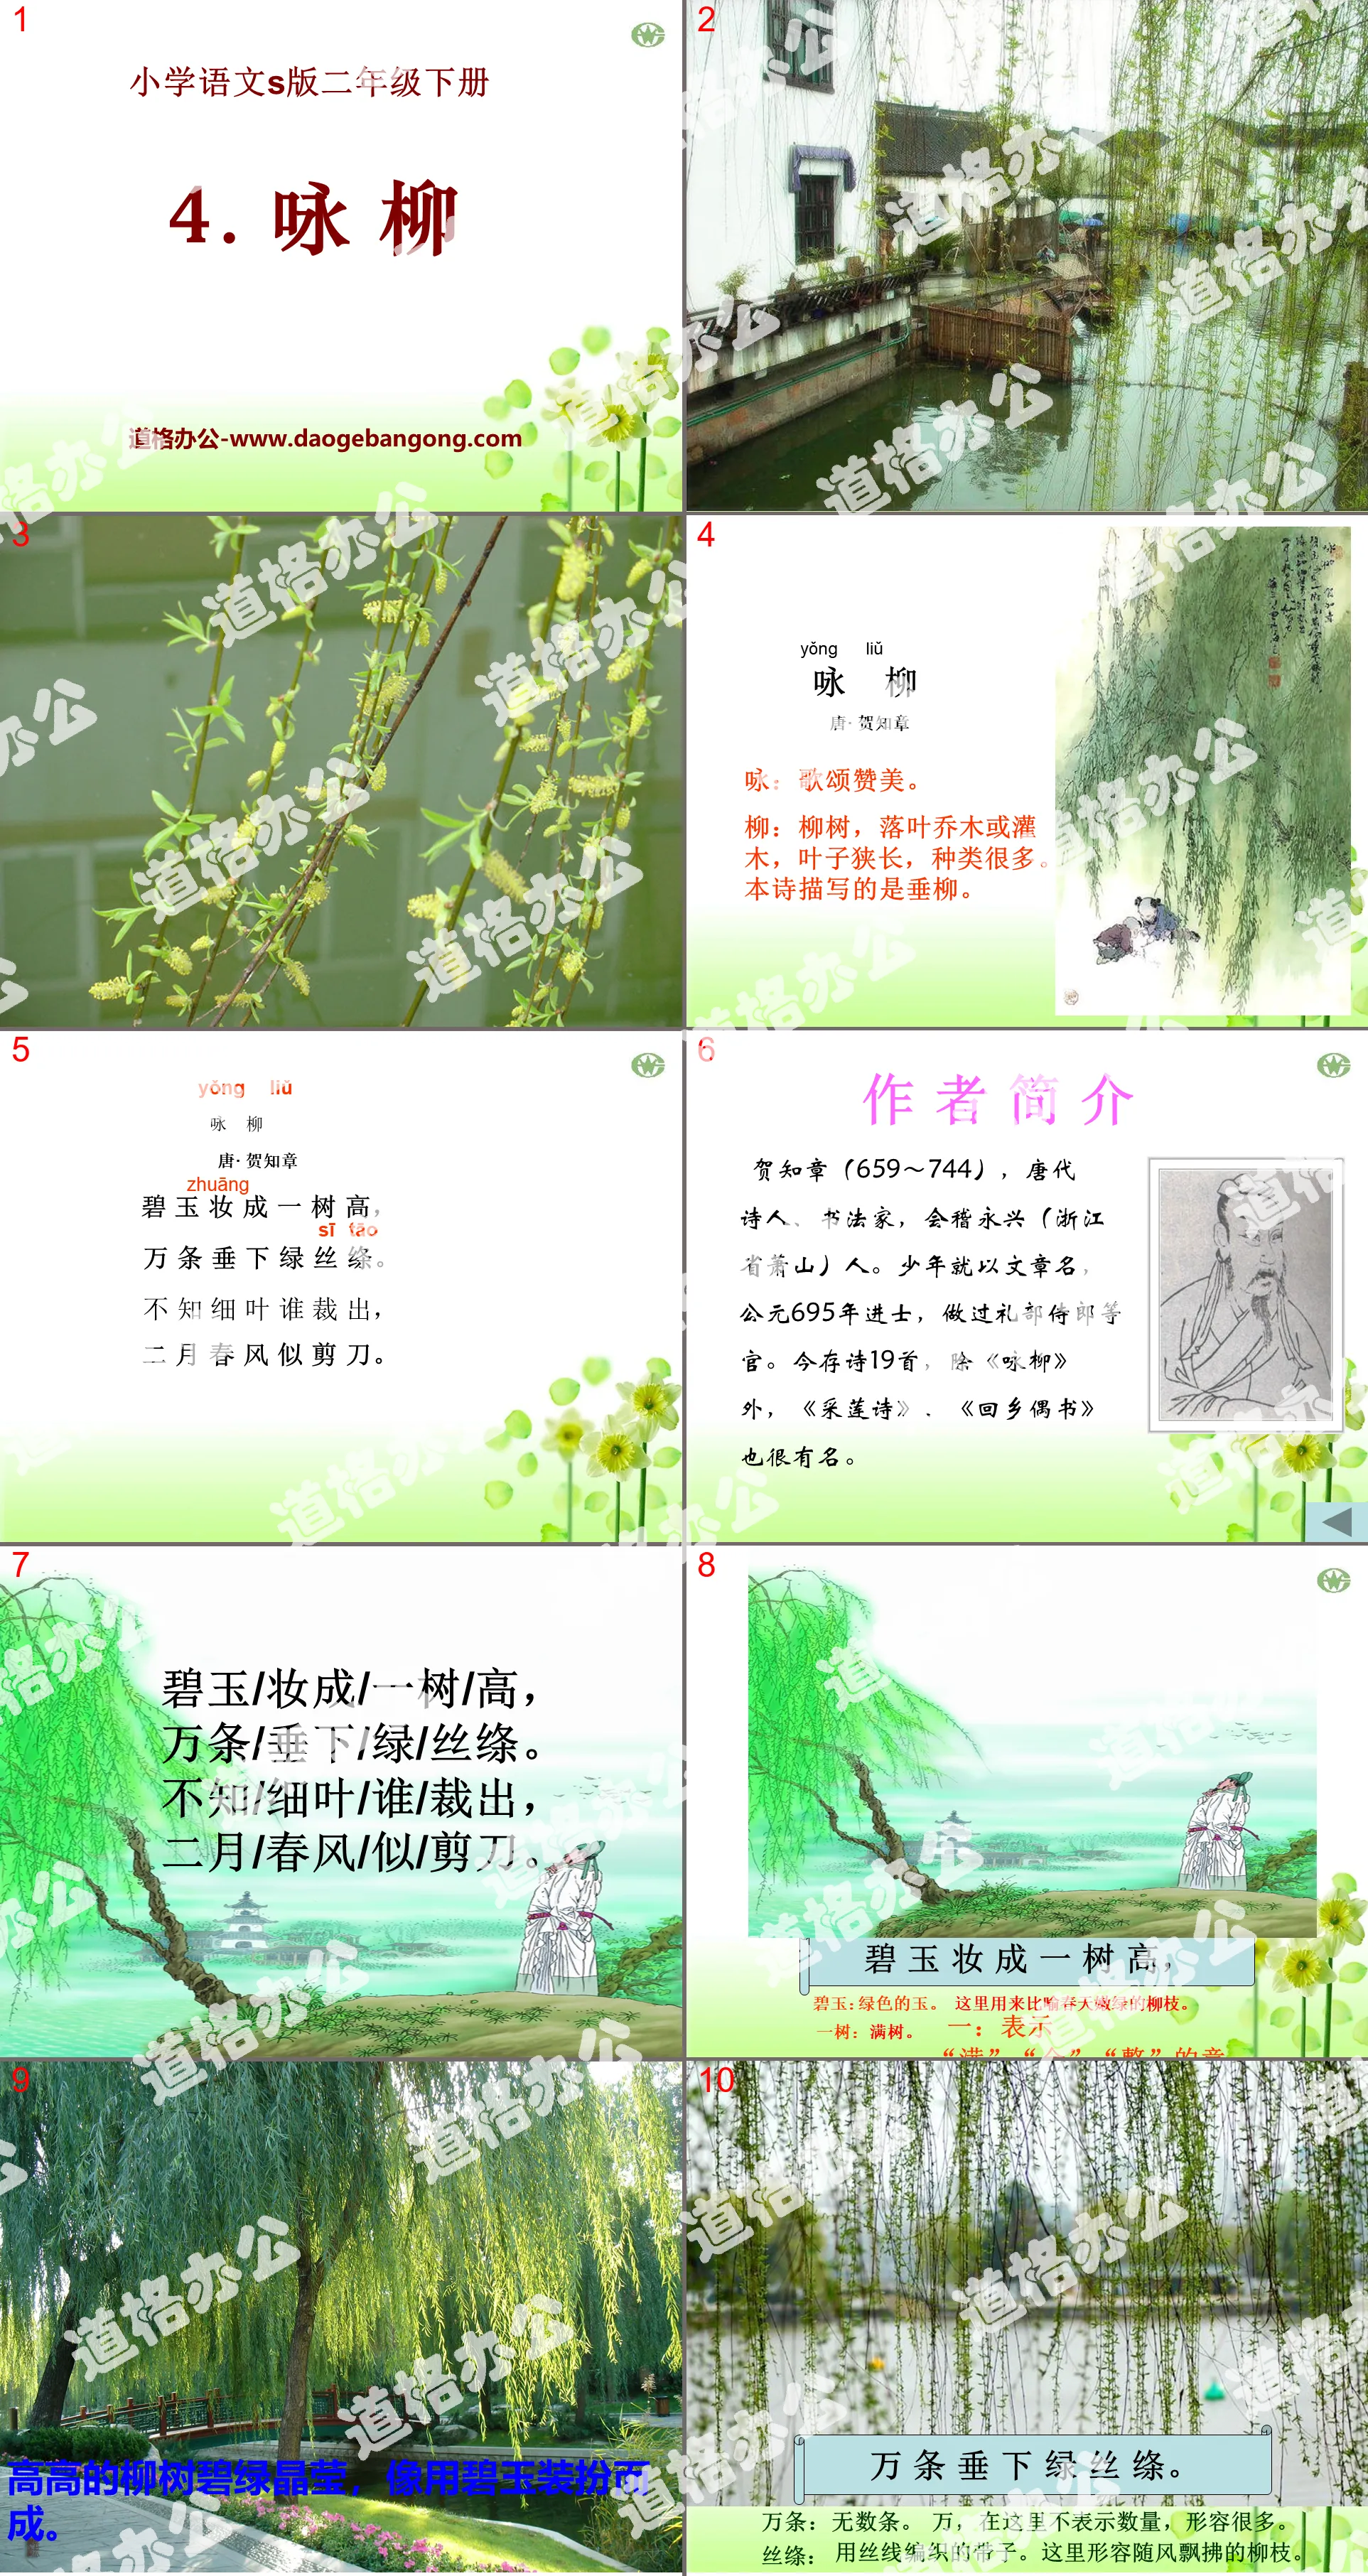 "Yong Willow" PPT courseware 14